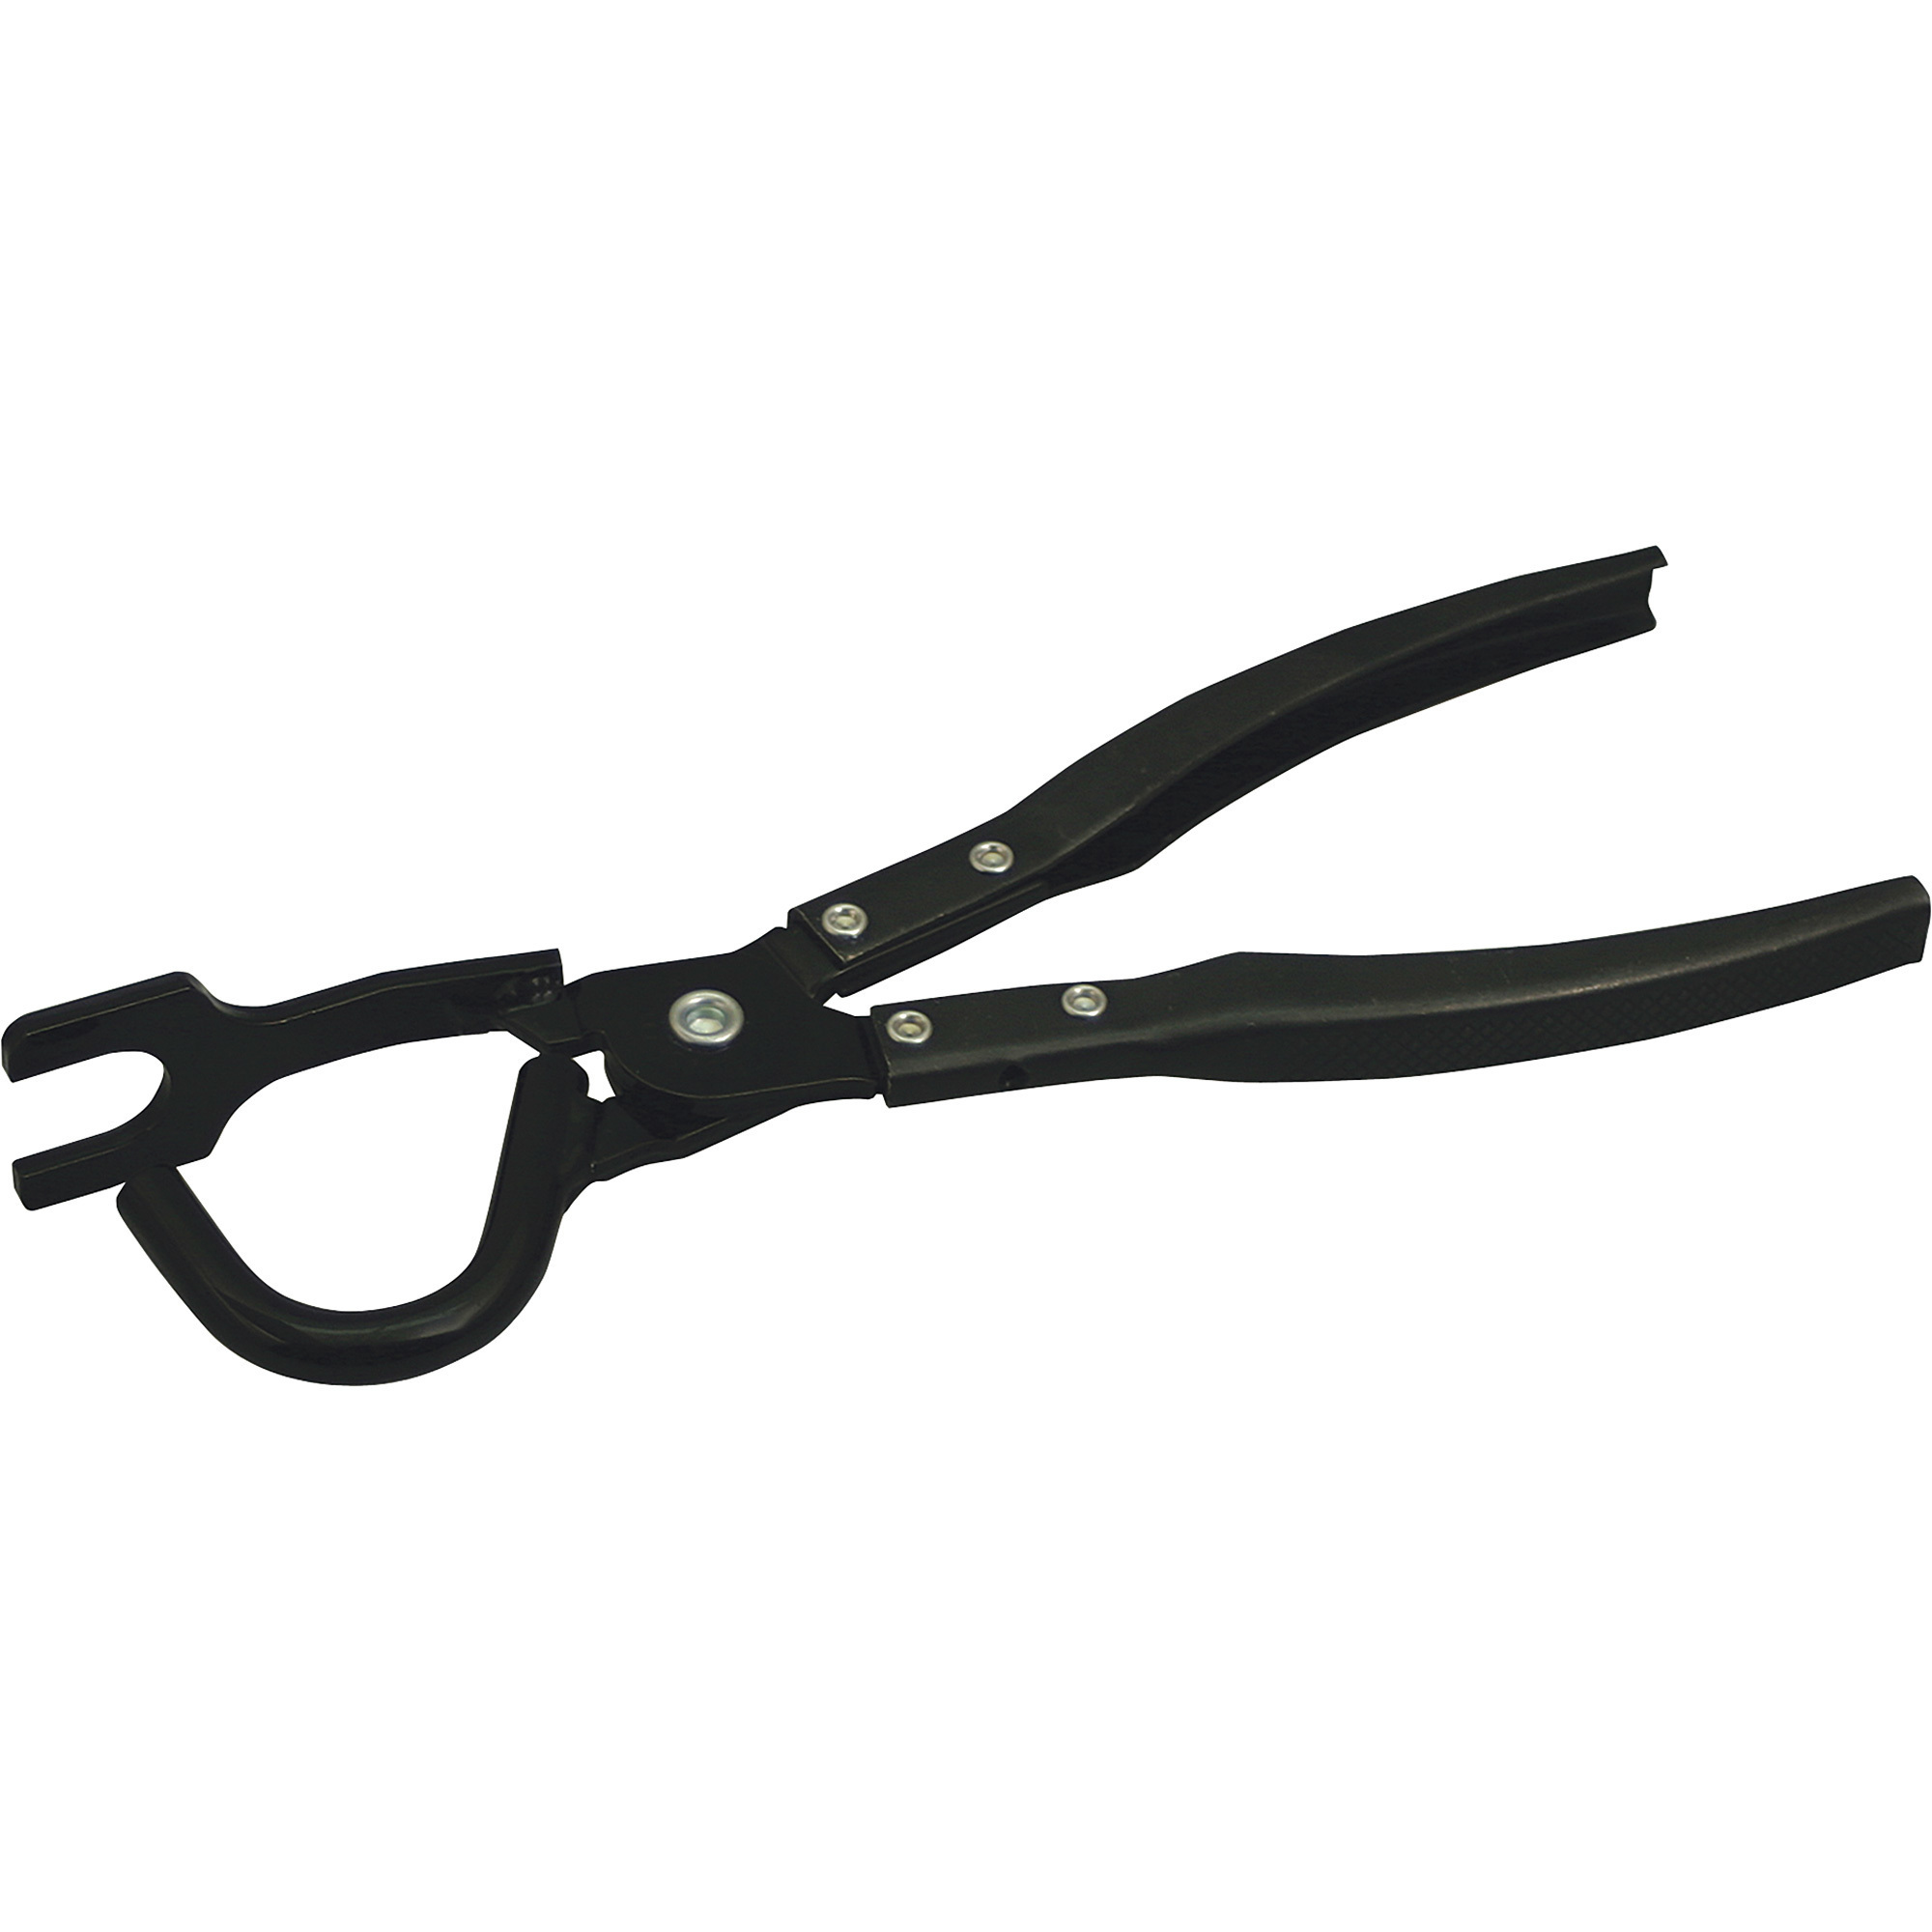 Lisle Exhaust Removal Pliers, Model 38350